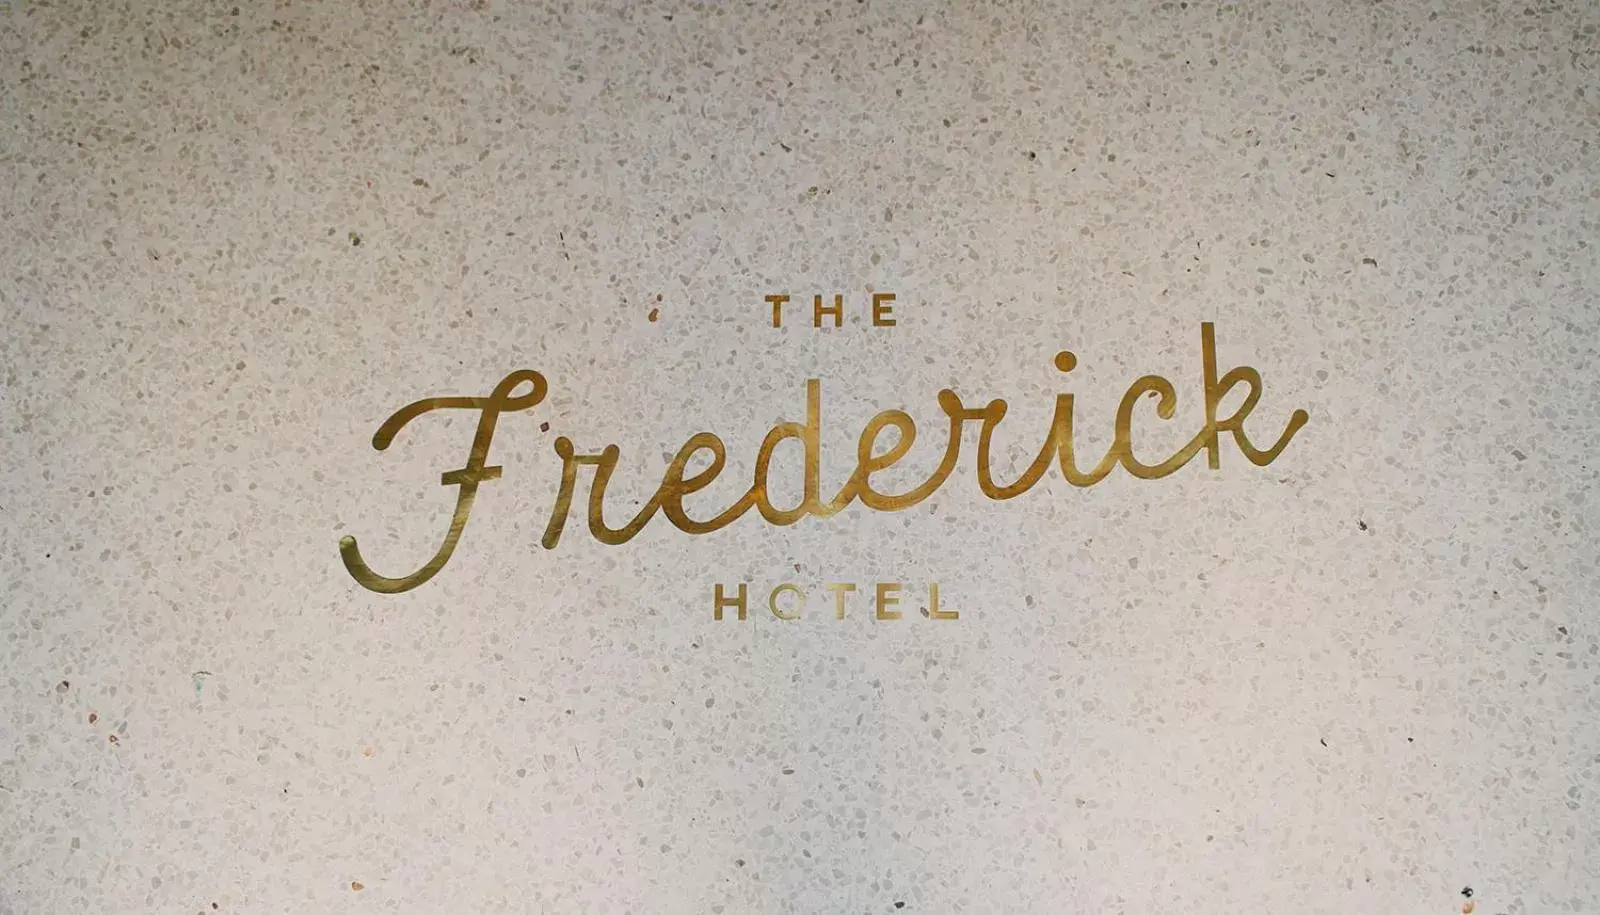 Property logo or sign in The Frederick Hotel Tribeca